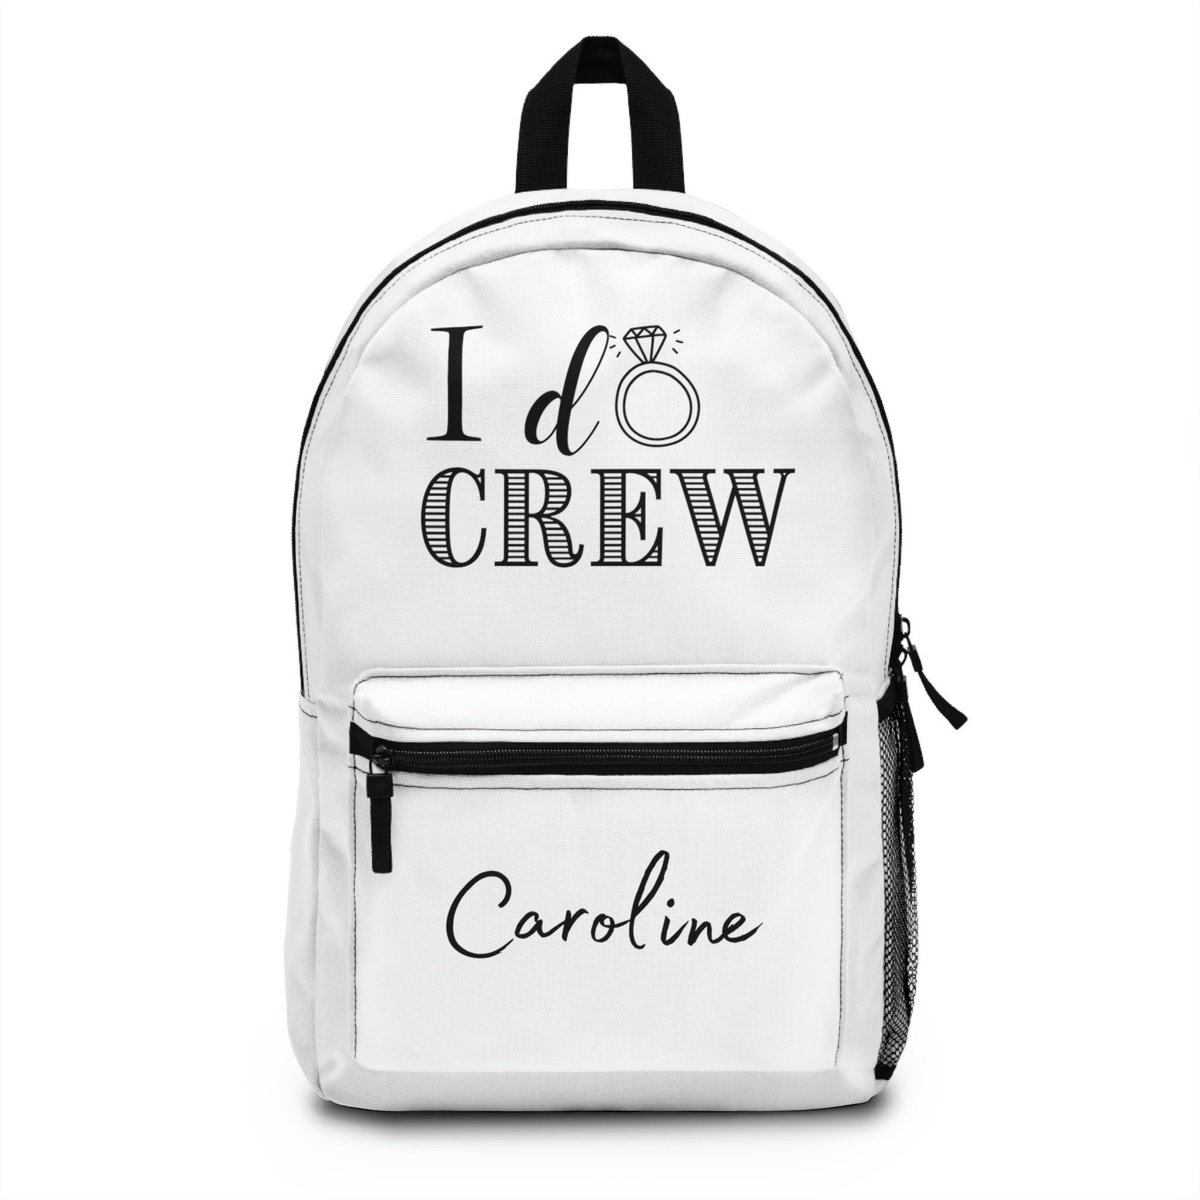 Excited to share this item from my shop: Personalized 'I Do Crew' Backpack for Bridesmaids #weddingpartygear #customizedgift #bridalsquadgift #giftforbridesmaids #weddingbackpack #bridalpartybackpac #personalizedbride #bridesmaidproposal #bridalpartygift etsy.me/42f8bMY